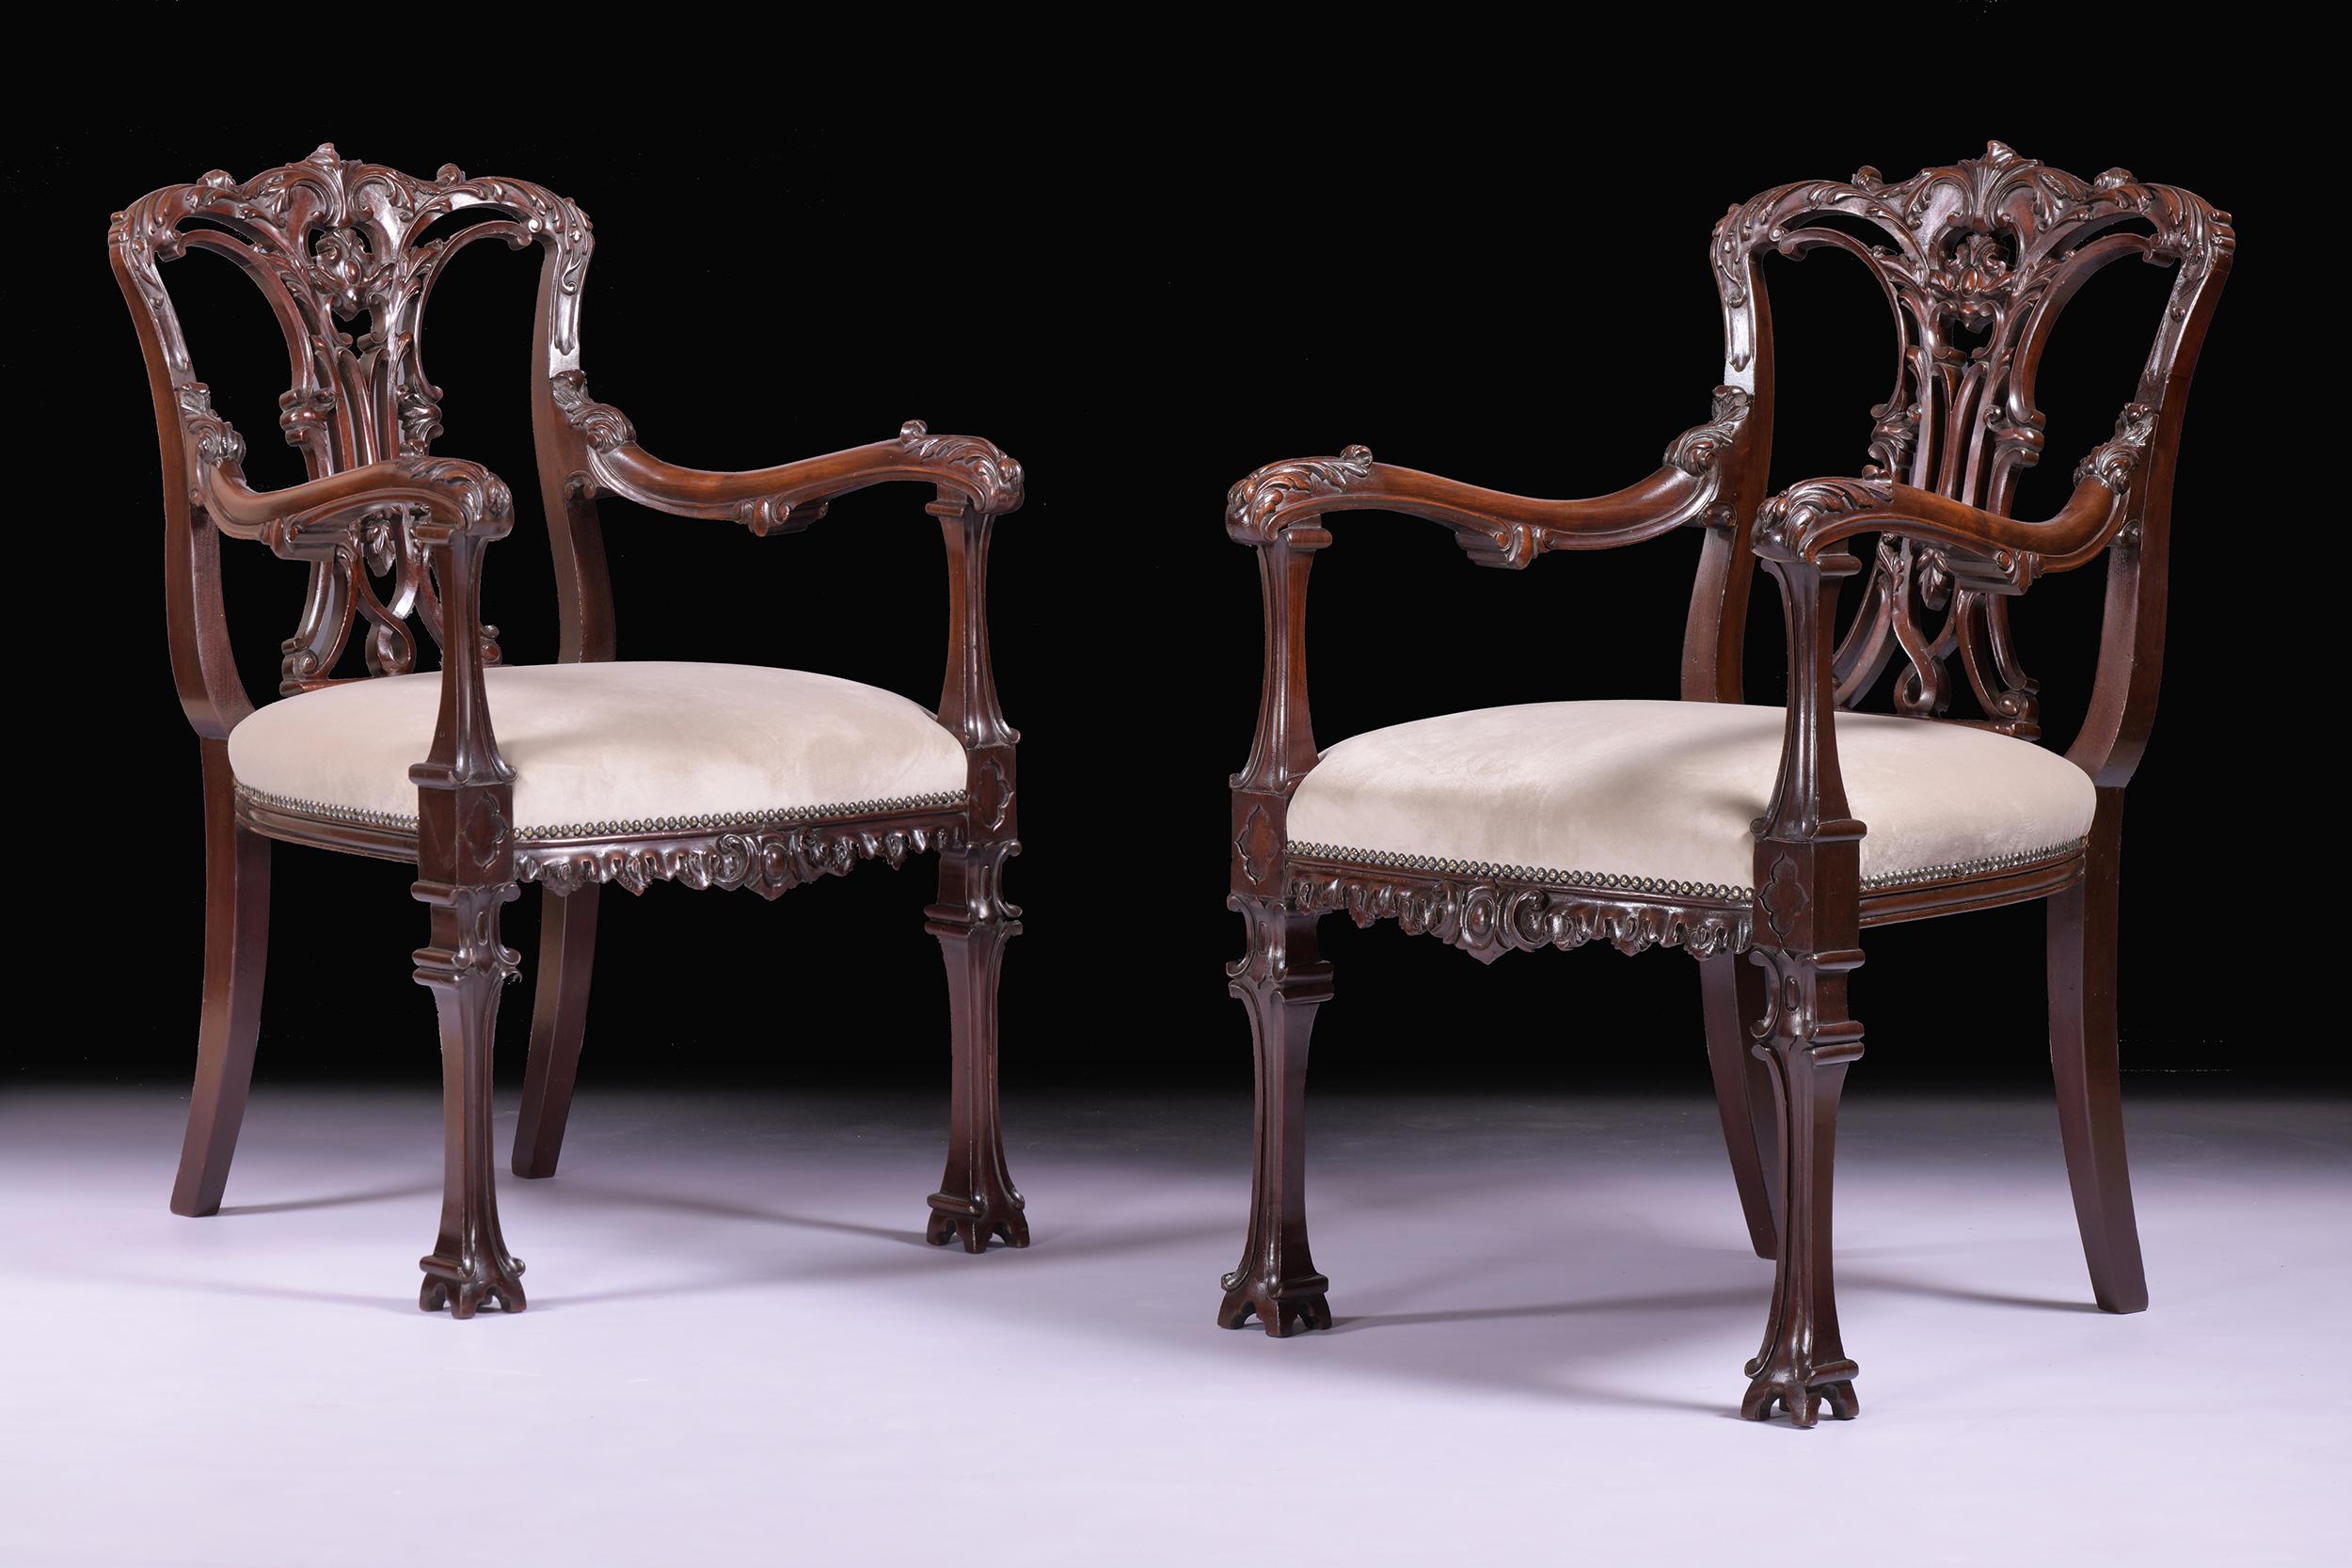 English Pair Of 19th Century Armchairs In The Chinese Chippendale Style For Sale